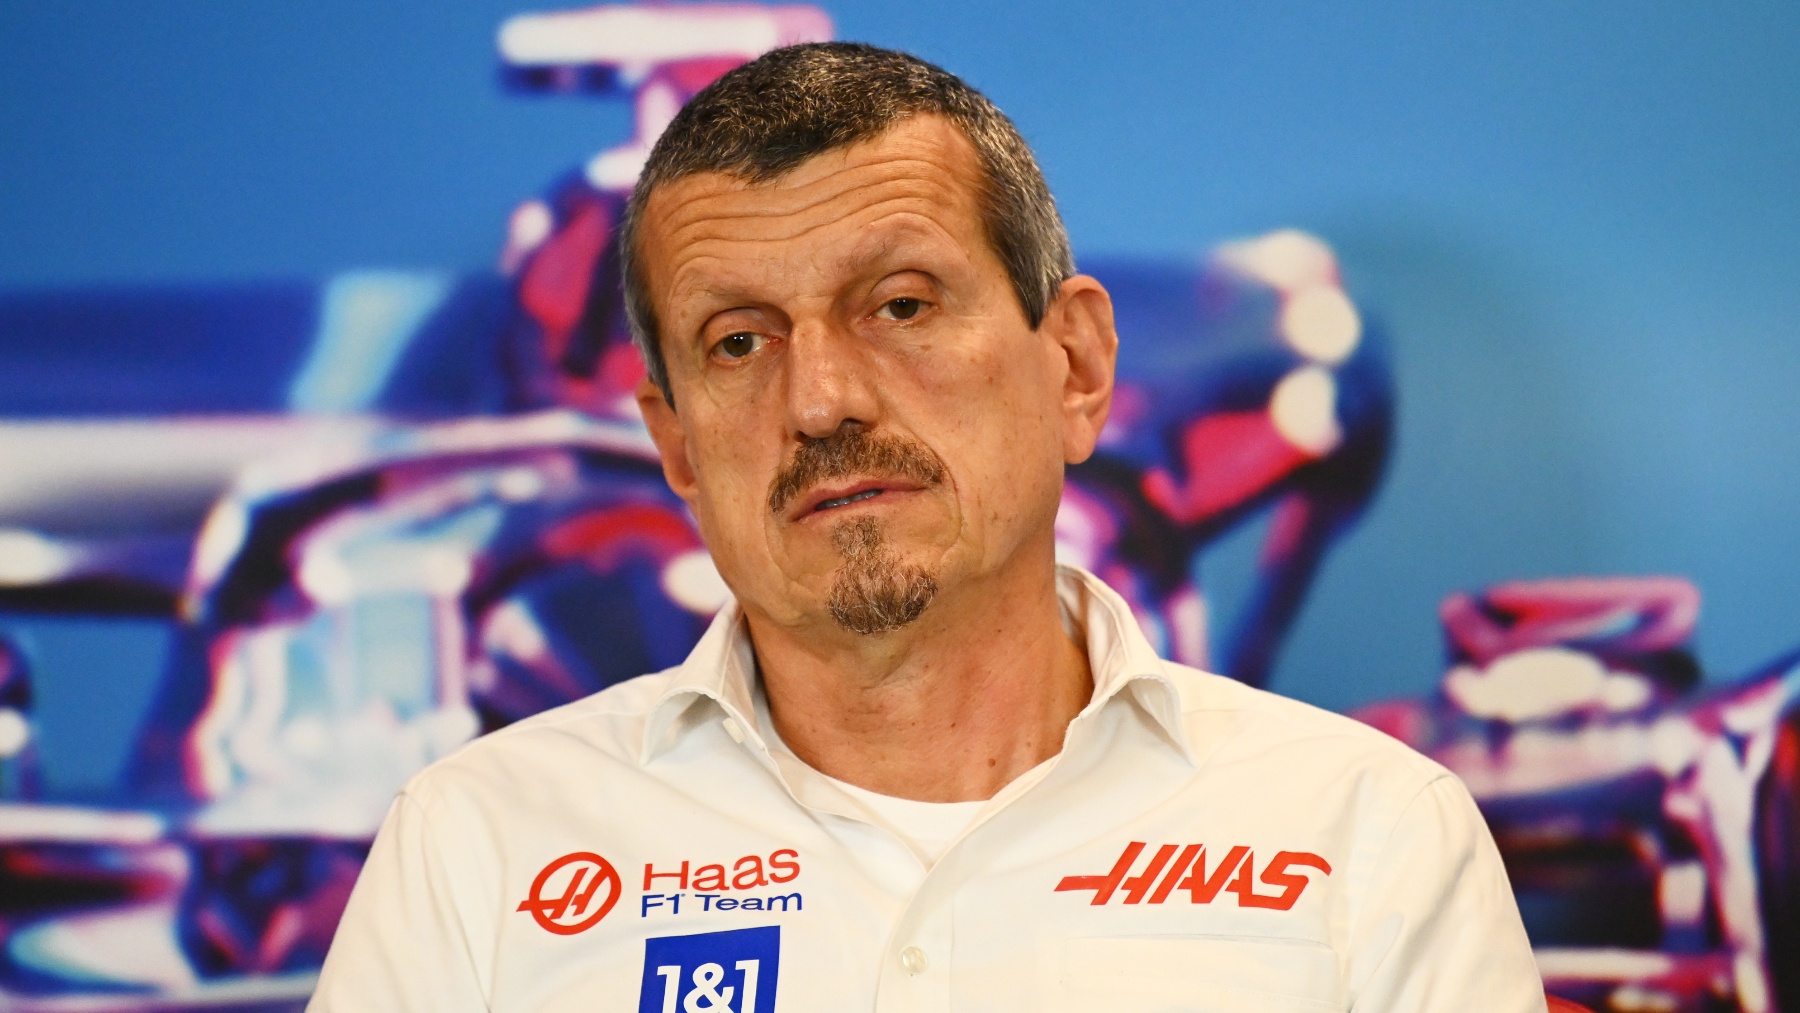 Guenther Steiner, jefe del equipo Haas. (Getty)